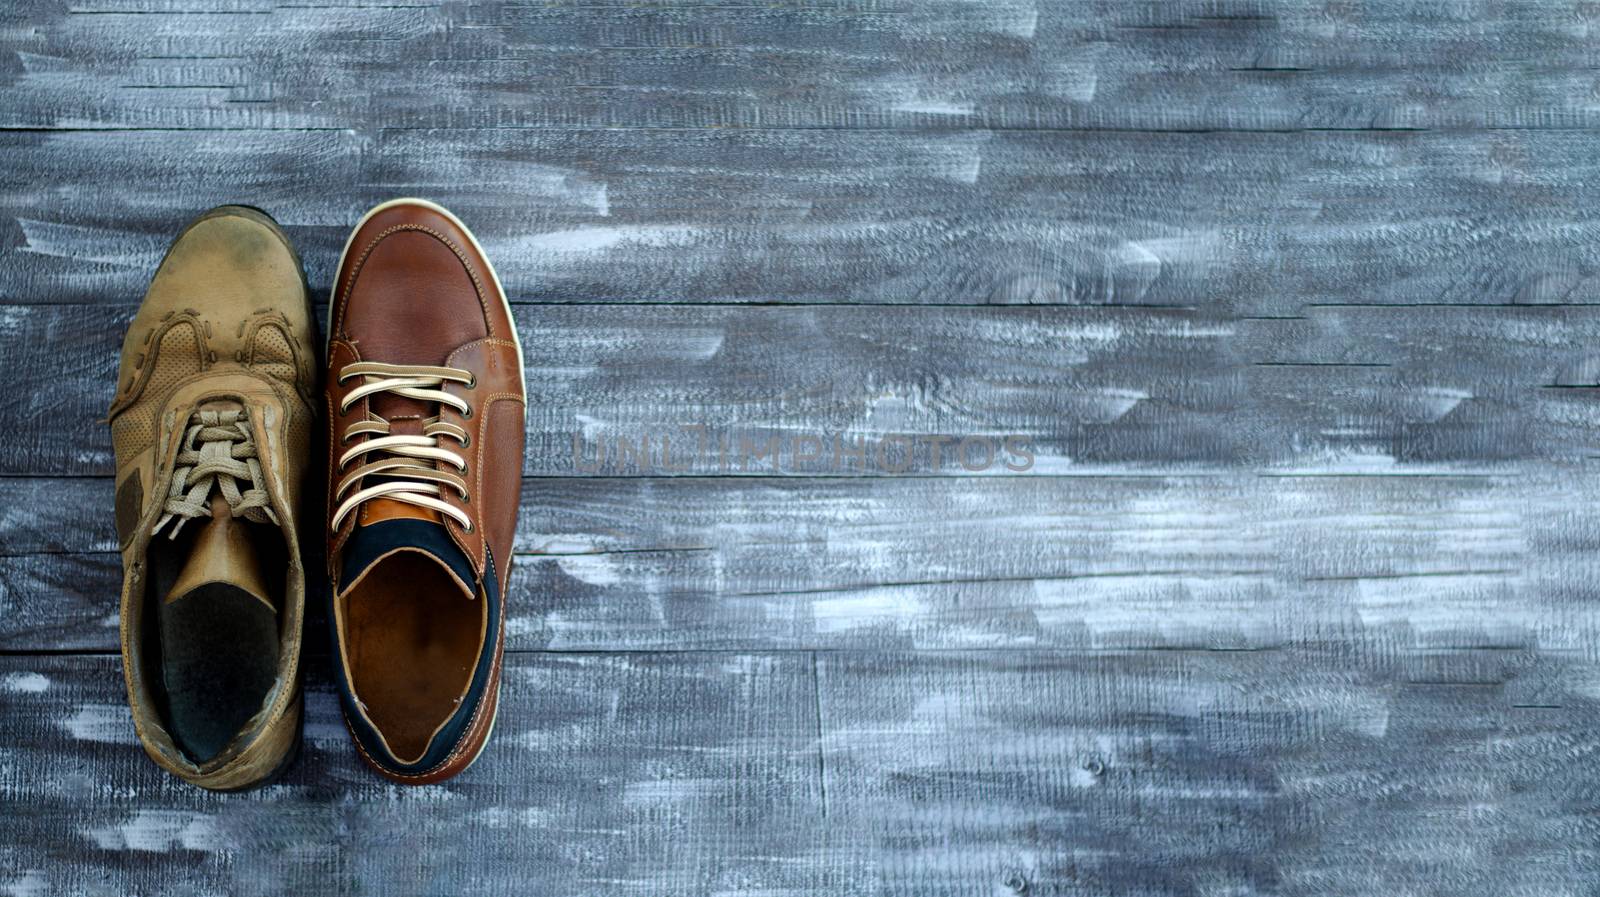 Brown shoes on a wooden background. One pair of leather sneakers, one very worn out second and new. Black Friday - time to buy new sneakers. Sneakers in the lower left corner with laces. Close-up. Copy space